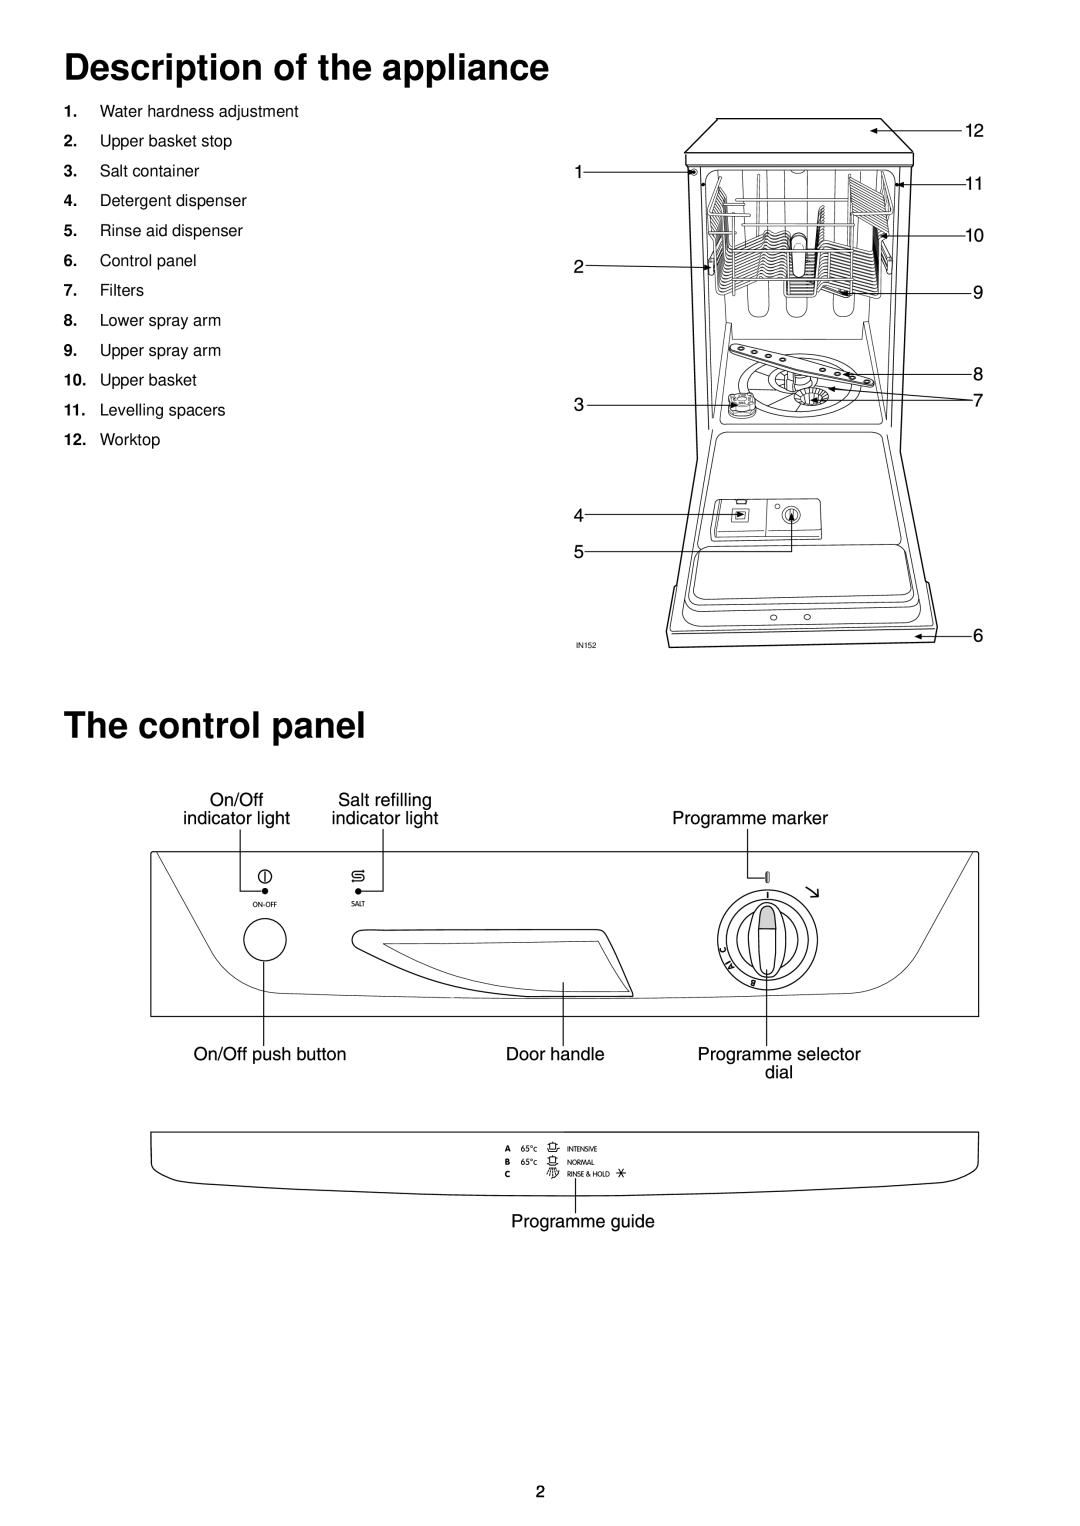 Zanussi DA 4131 Description of the appliance, The control panel, Water hardness adjustment 2. Upper basket stop, IN152 